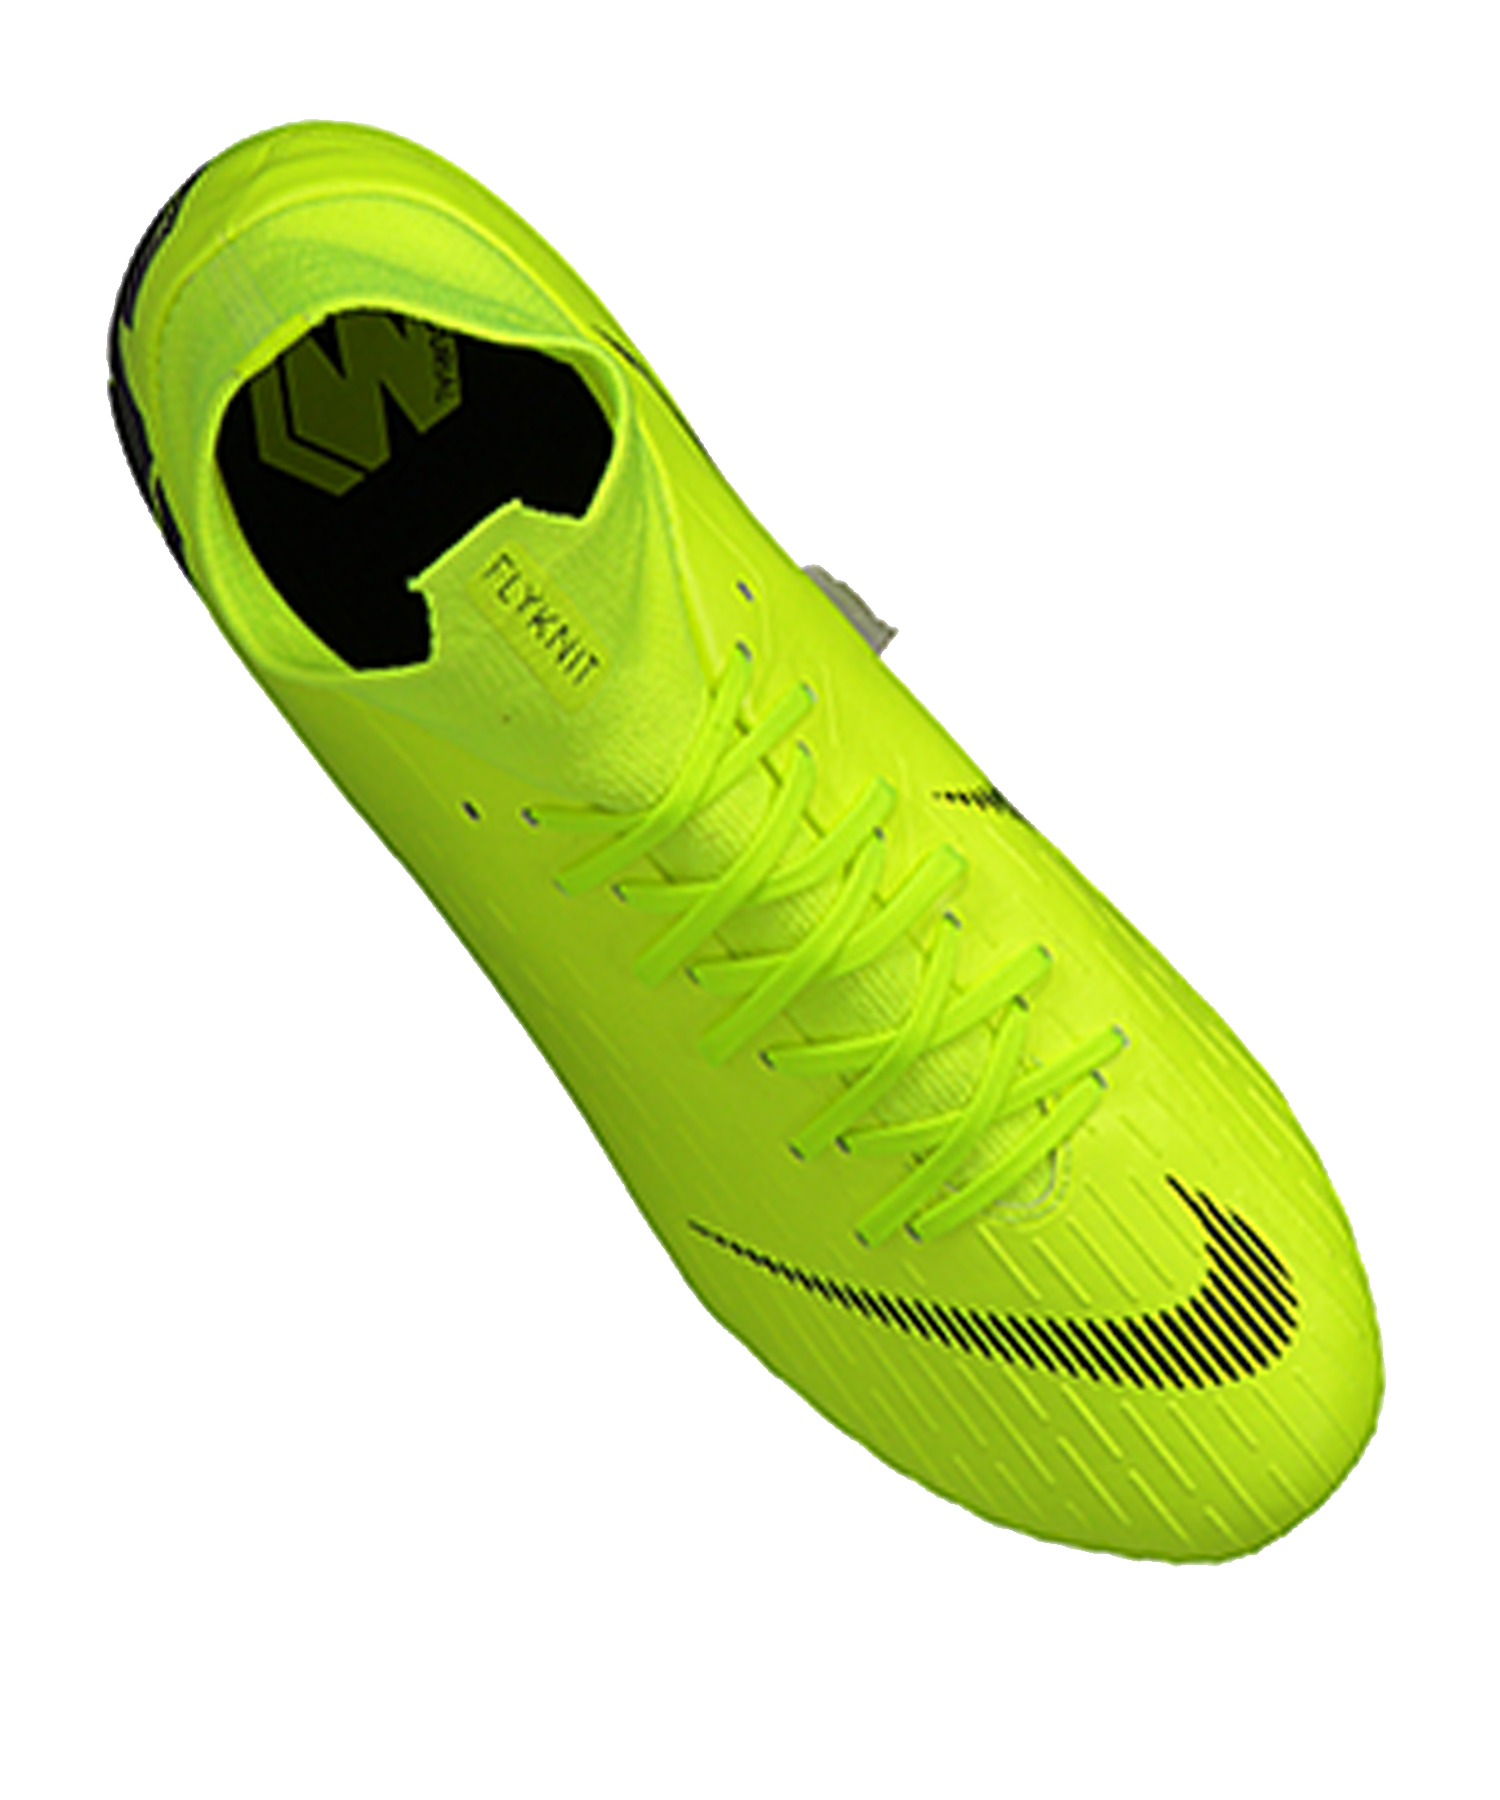 Nike Mercurial Superfly 6 and Vapor 12 'Game Over' Boots